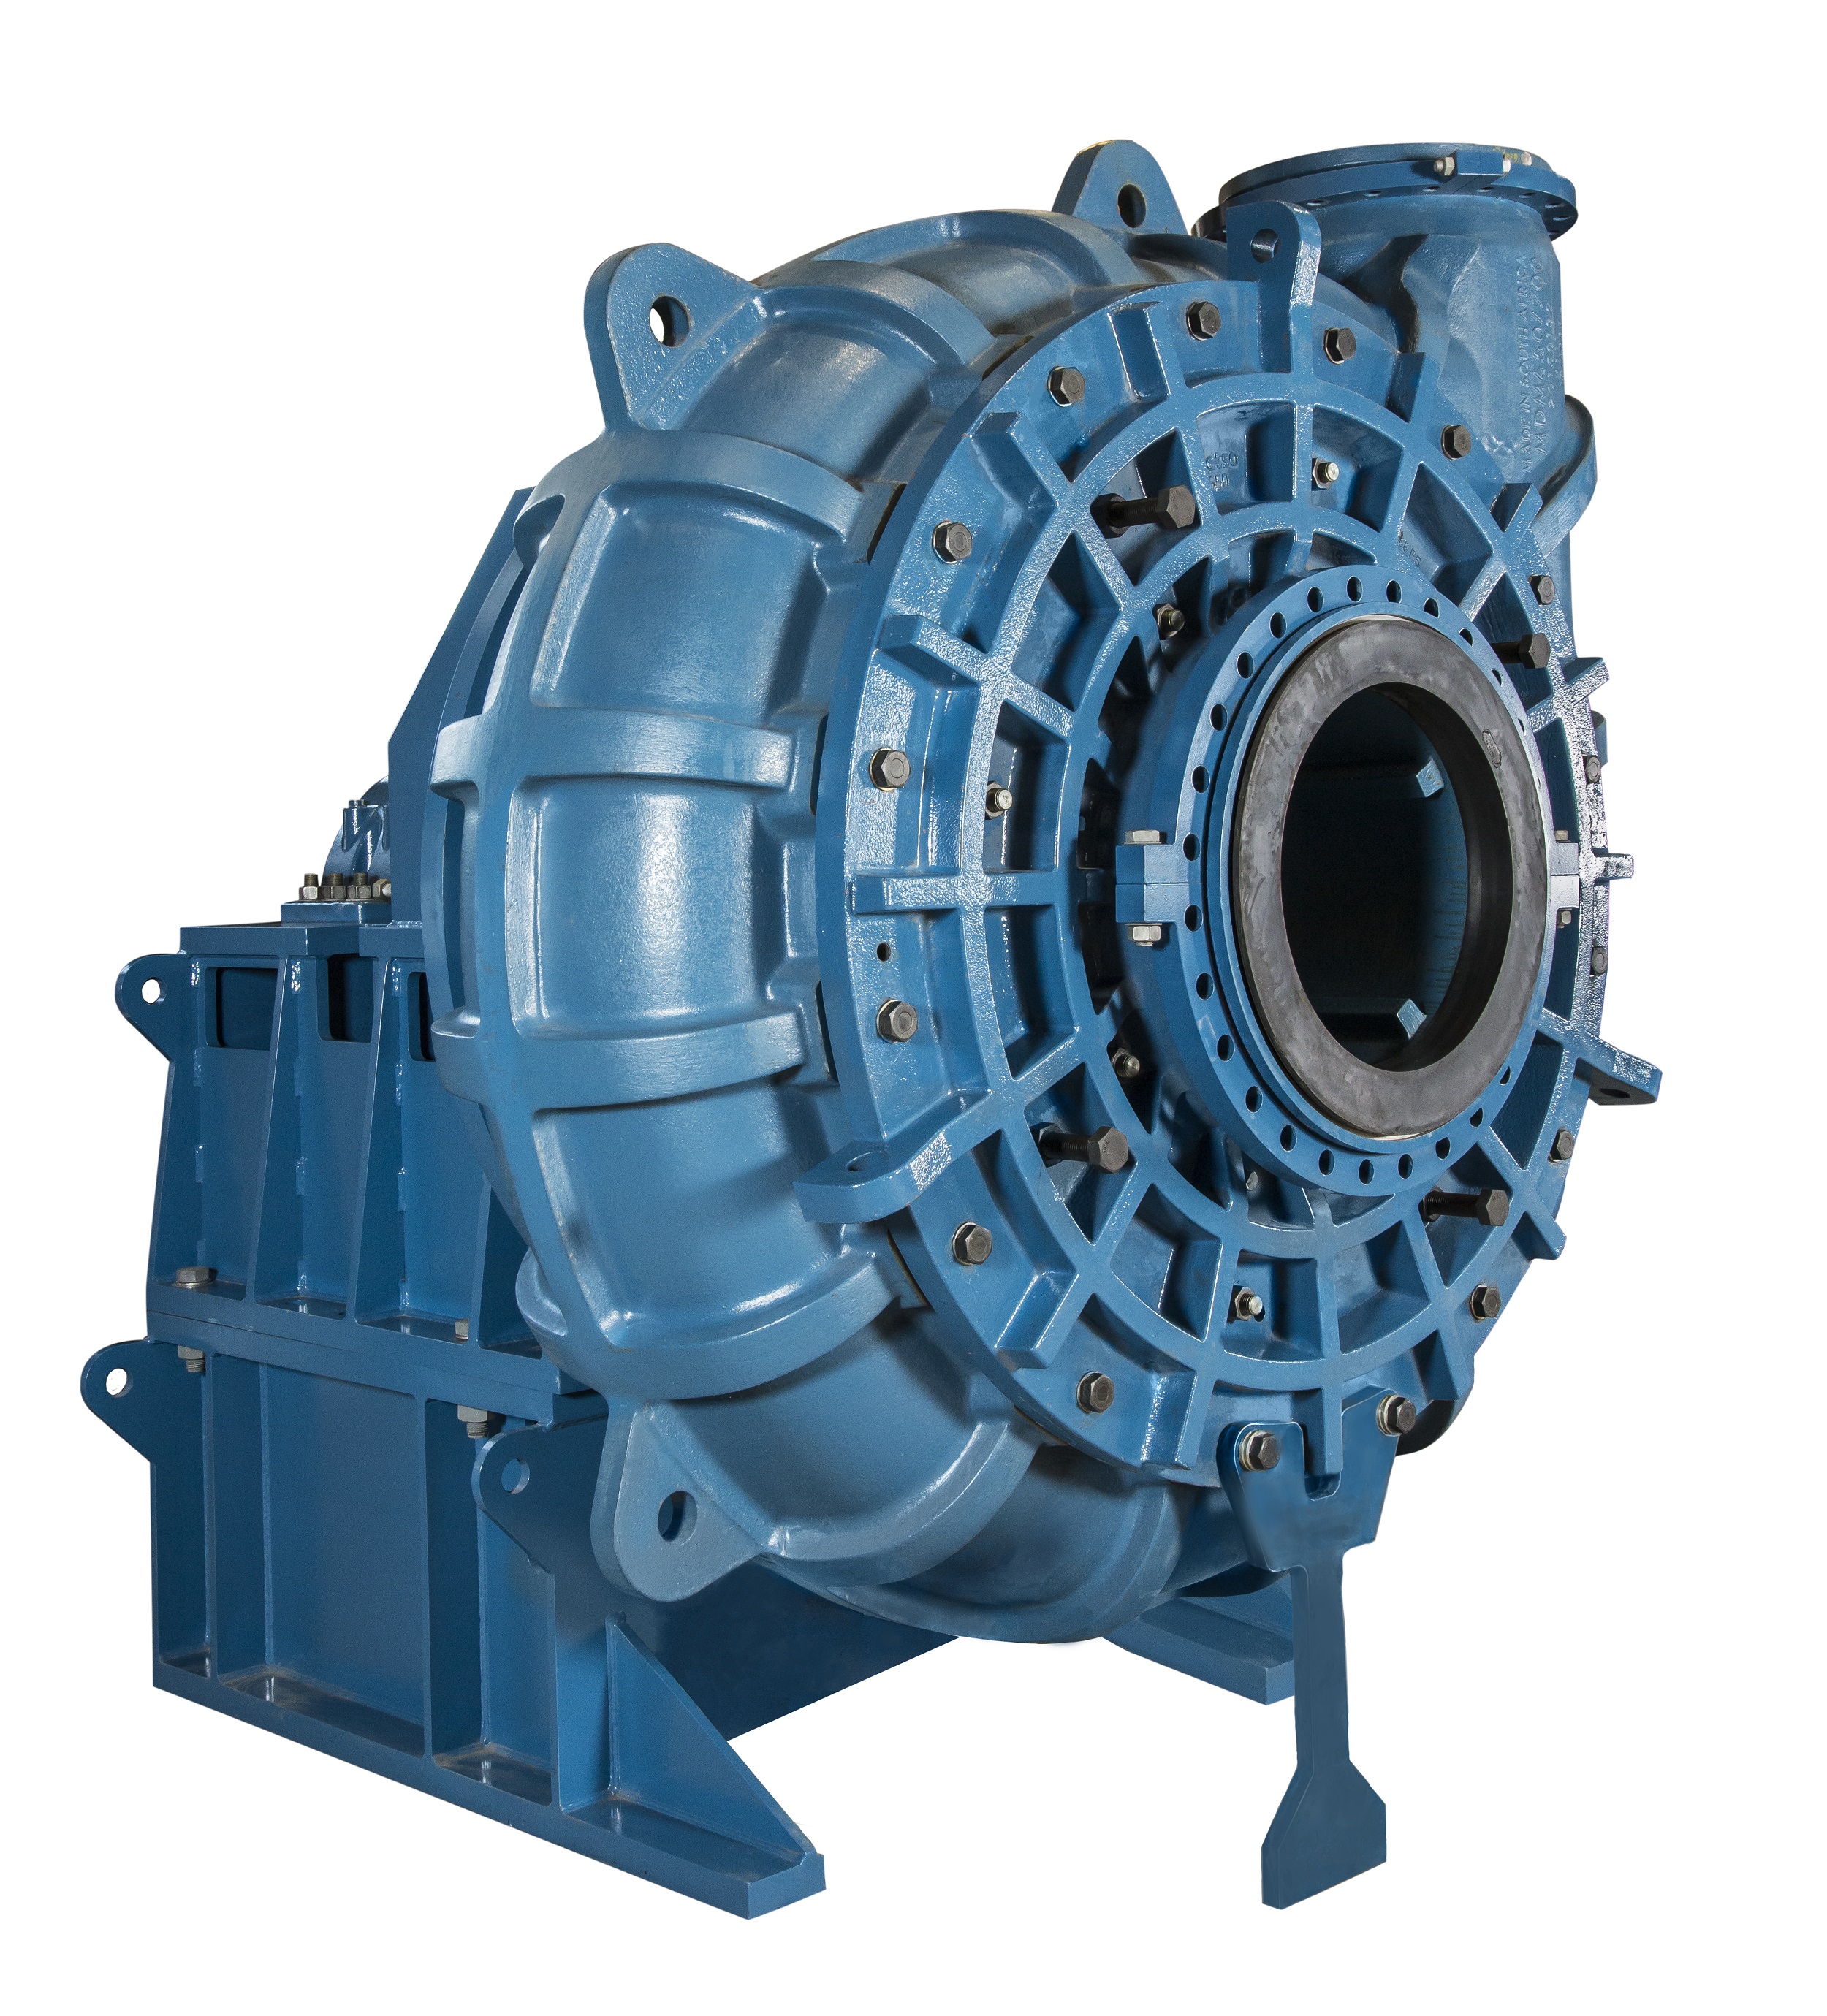 Metso Outotec mill discharge pumps are robust and have been designed to operate reliably in highly abrasive environments.